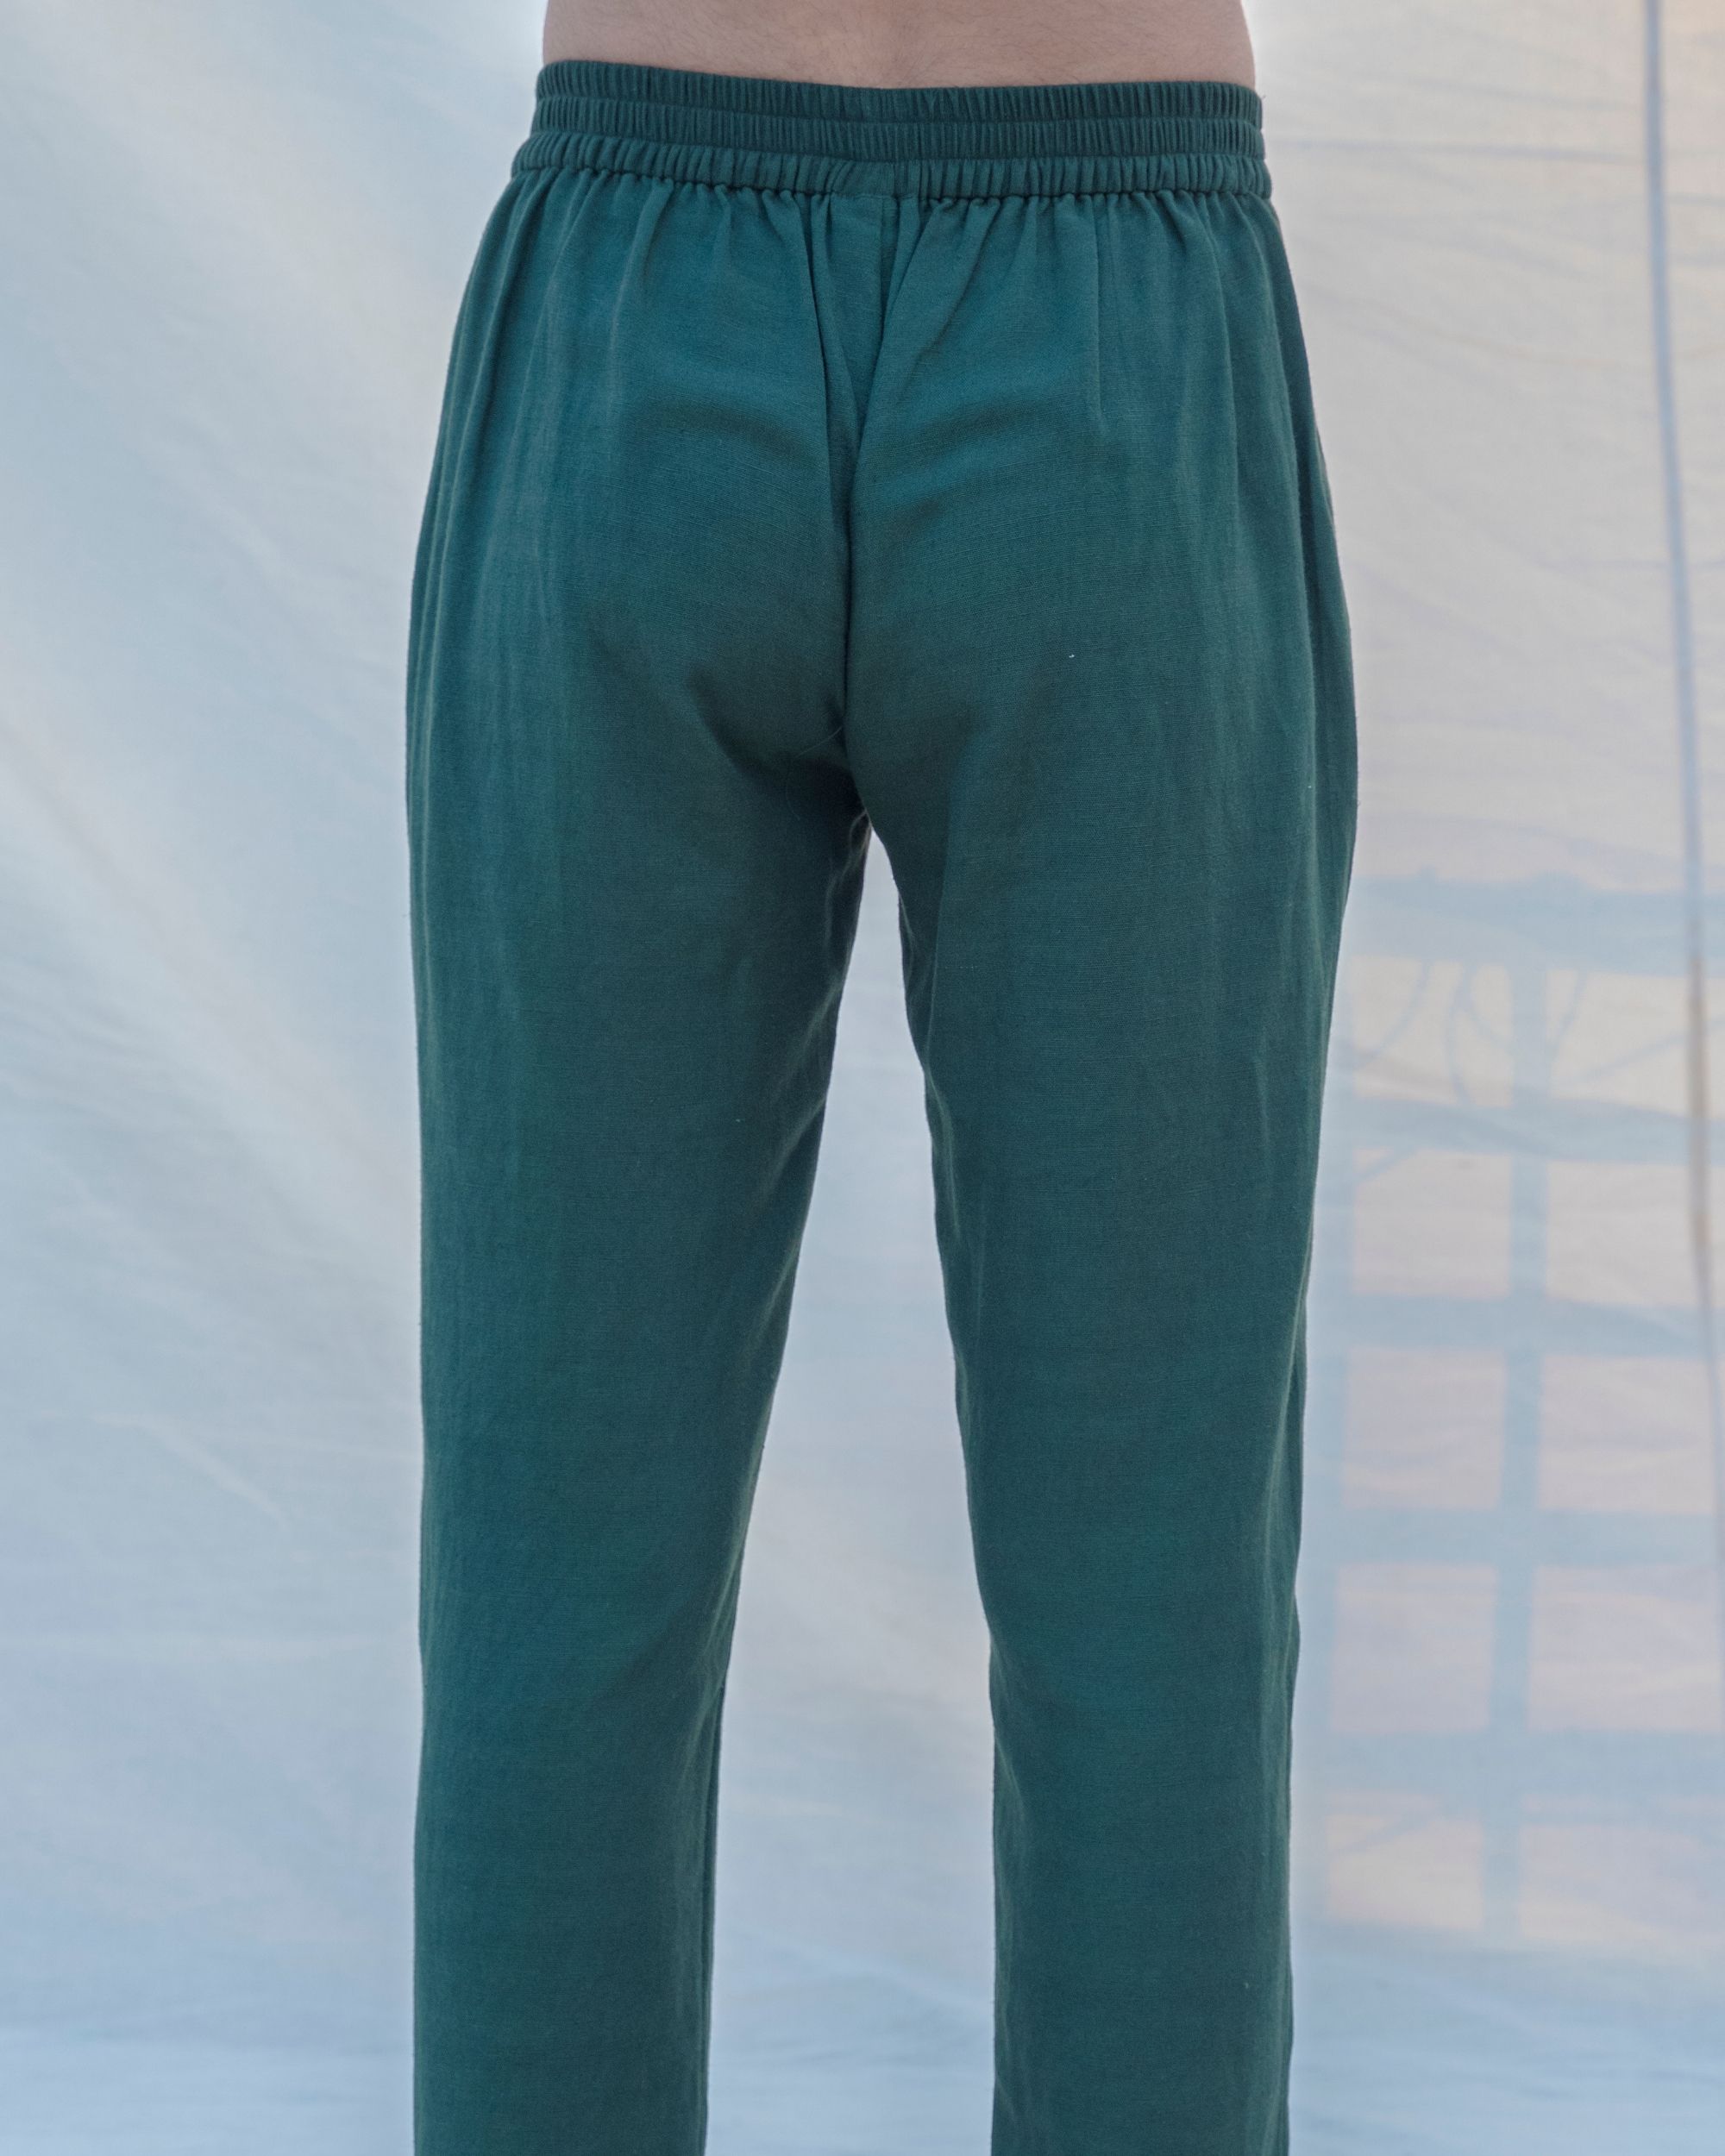 Buy Bottle Green Four Pocket Cargo Pants Pure Cotton for Best Price,  Reviews, Free Shipping